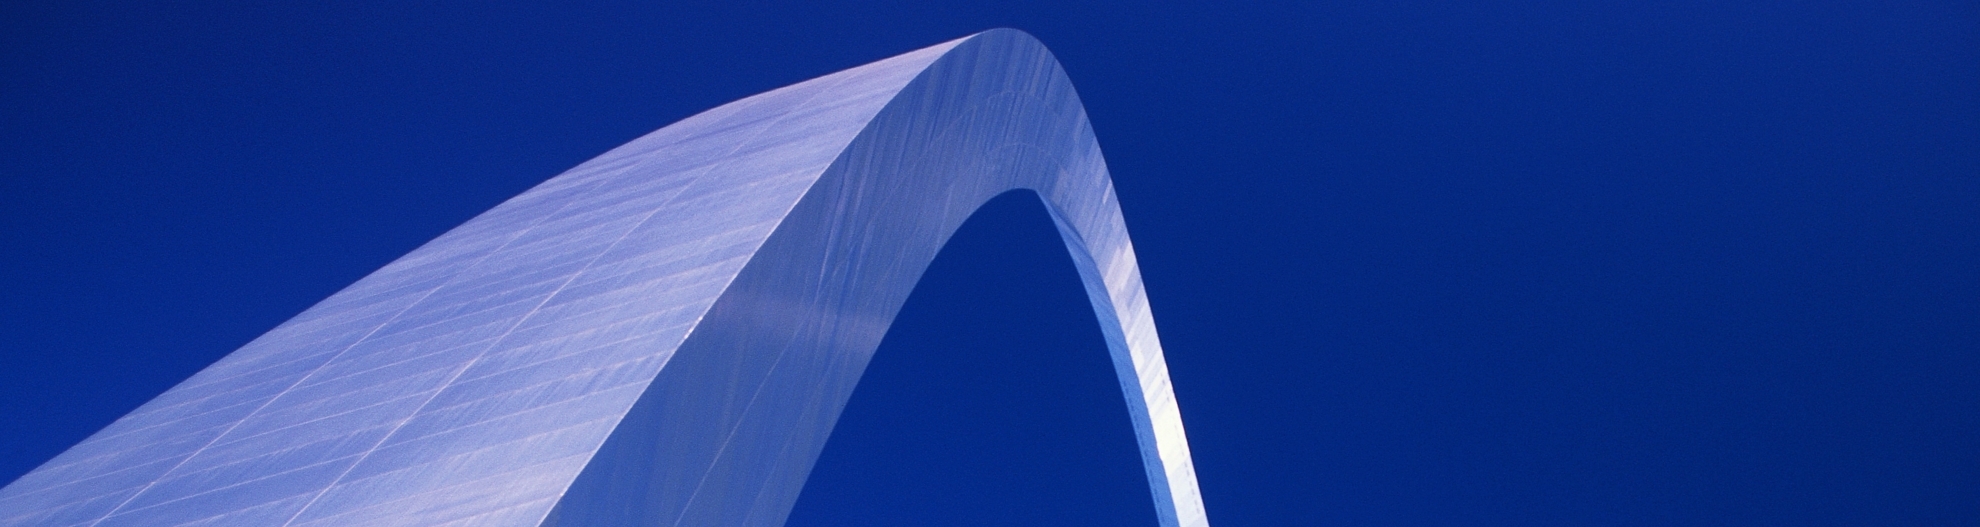 The St. Louis Arch